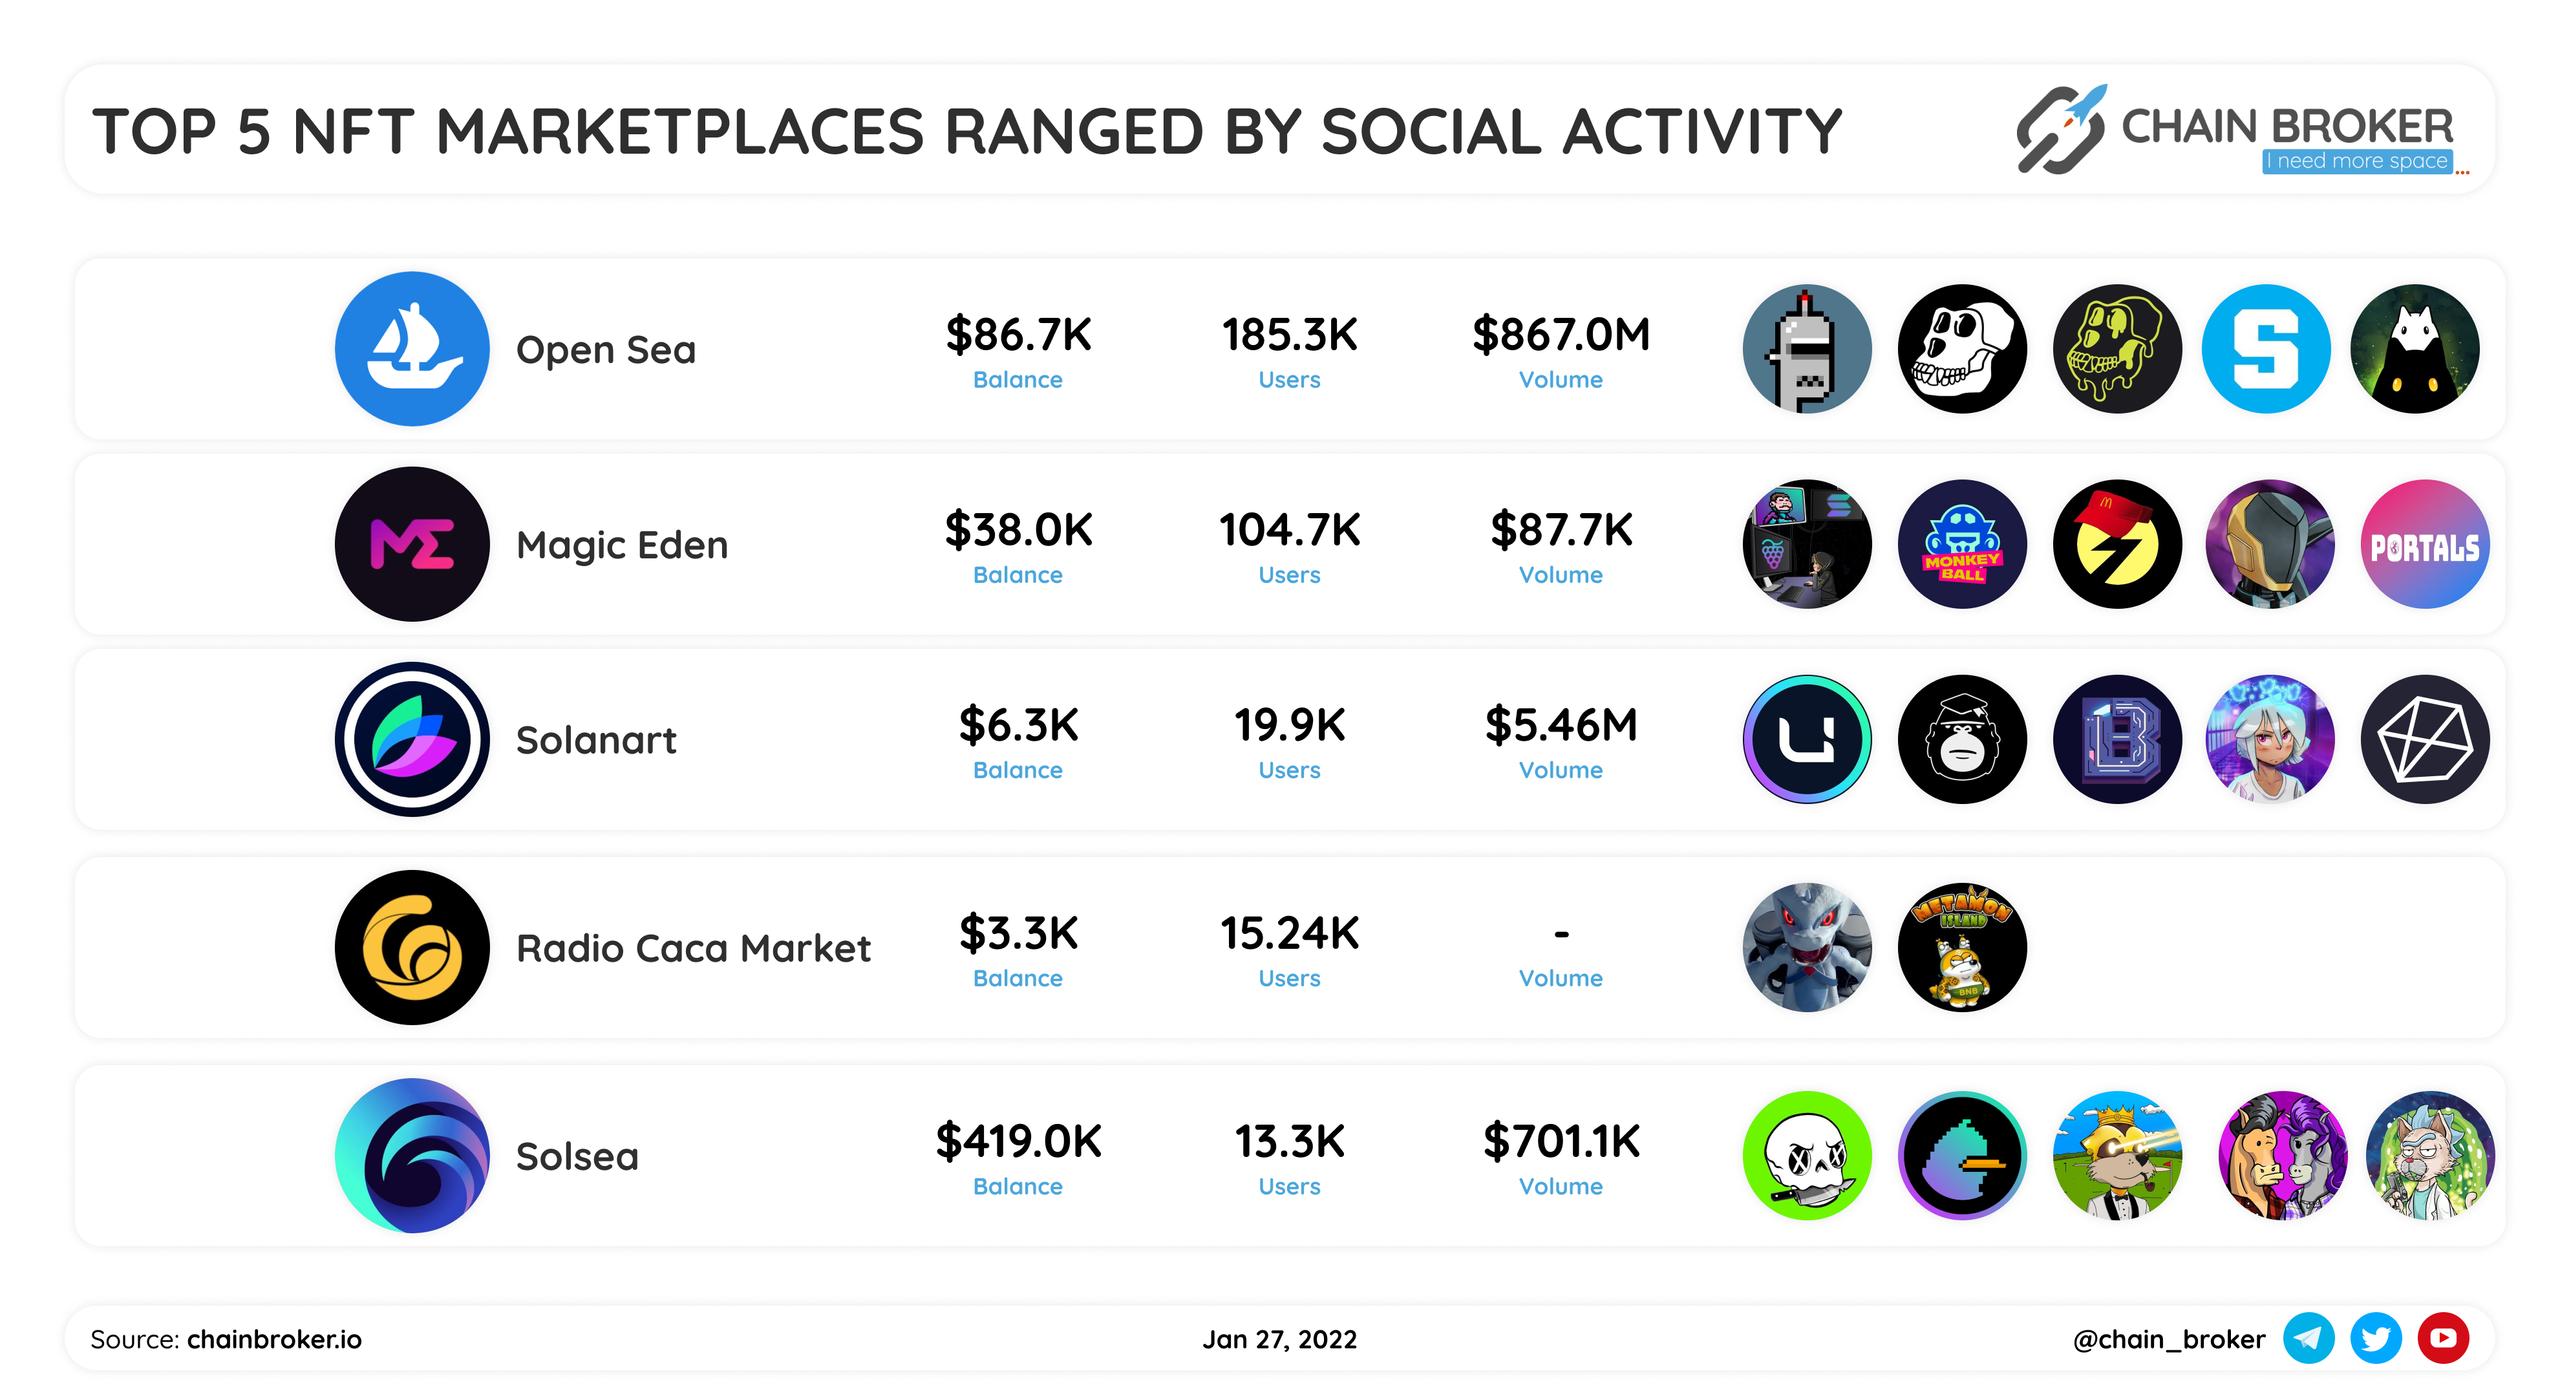 Top NFT Marketplaces ranged by social activity